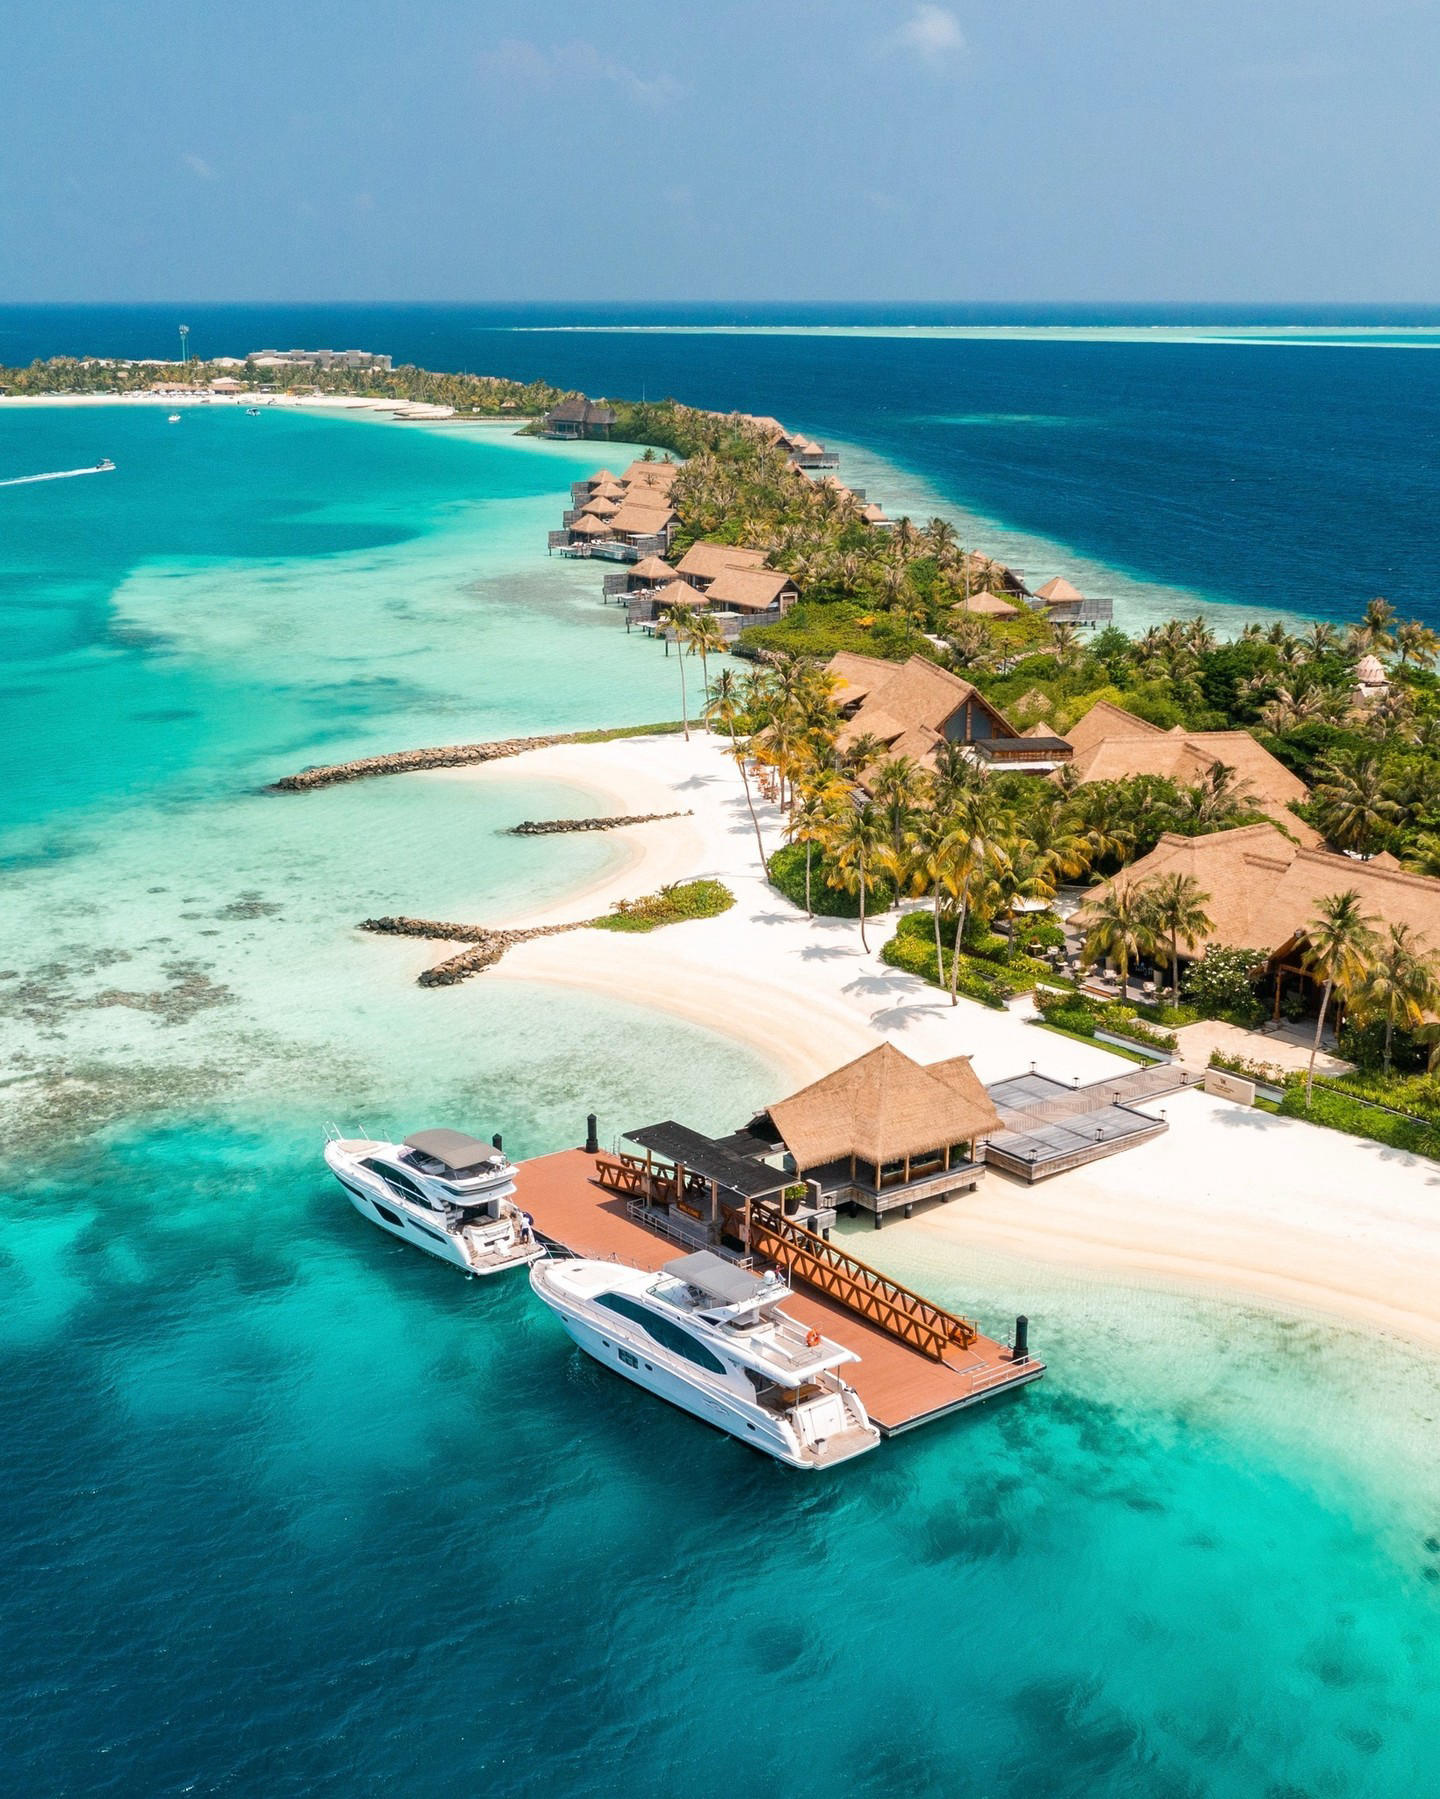 Escape the ordinary for sun-kissed moments and secluded barefoot living #waldorfastoriamaldives